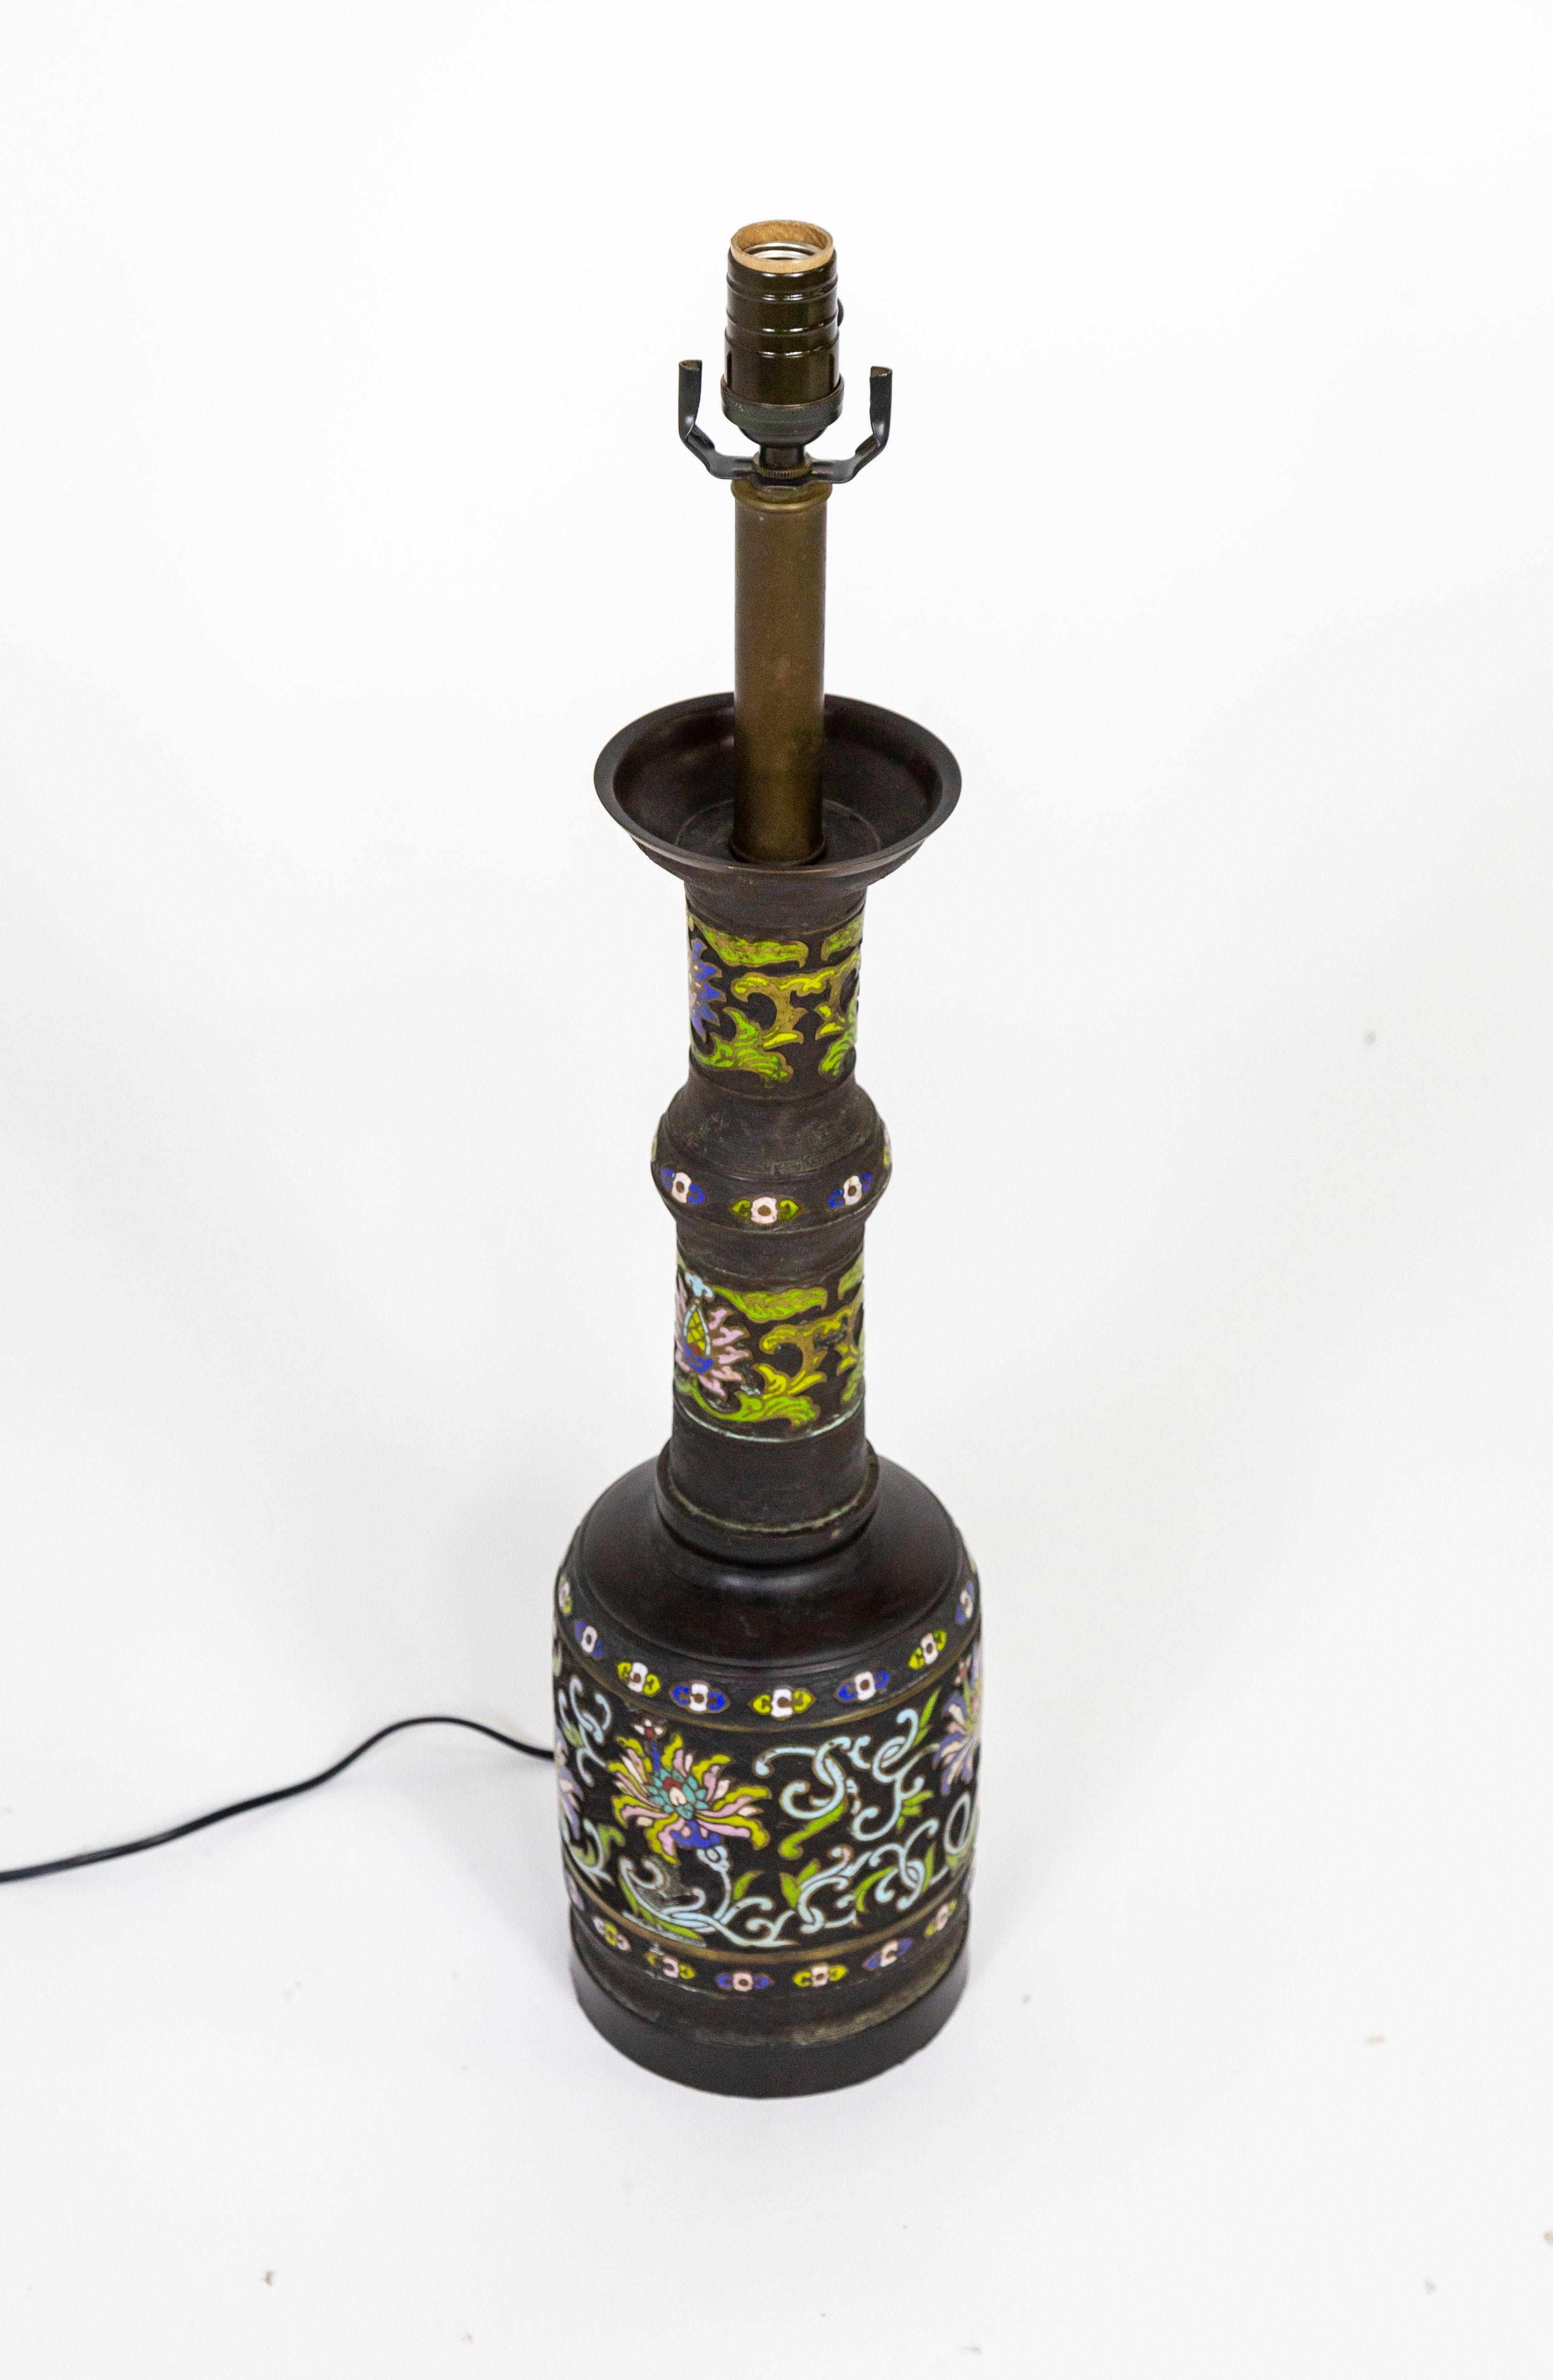 An early 20th century, black patinated, cast bronze and champleve enamel lamp; in an elongated shape with intricate greek key surface texture and floral motif. Champleve is a technique that creates recesses in metal by etching or casting and then